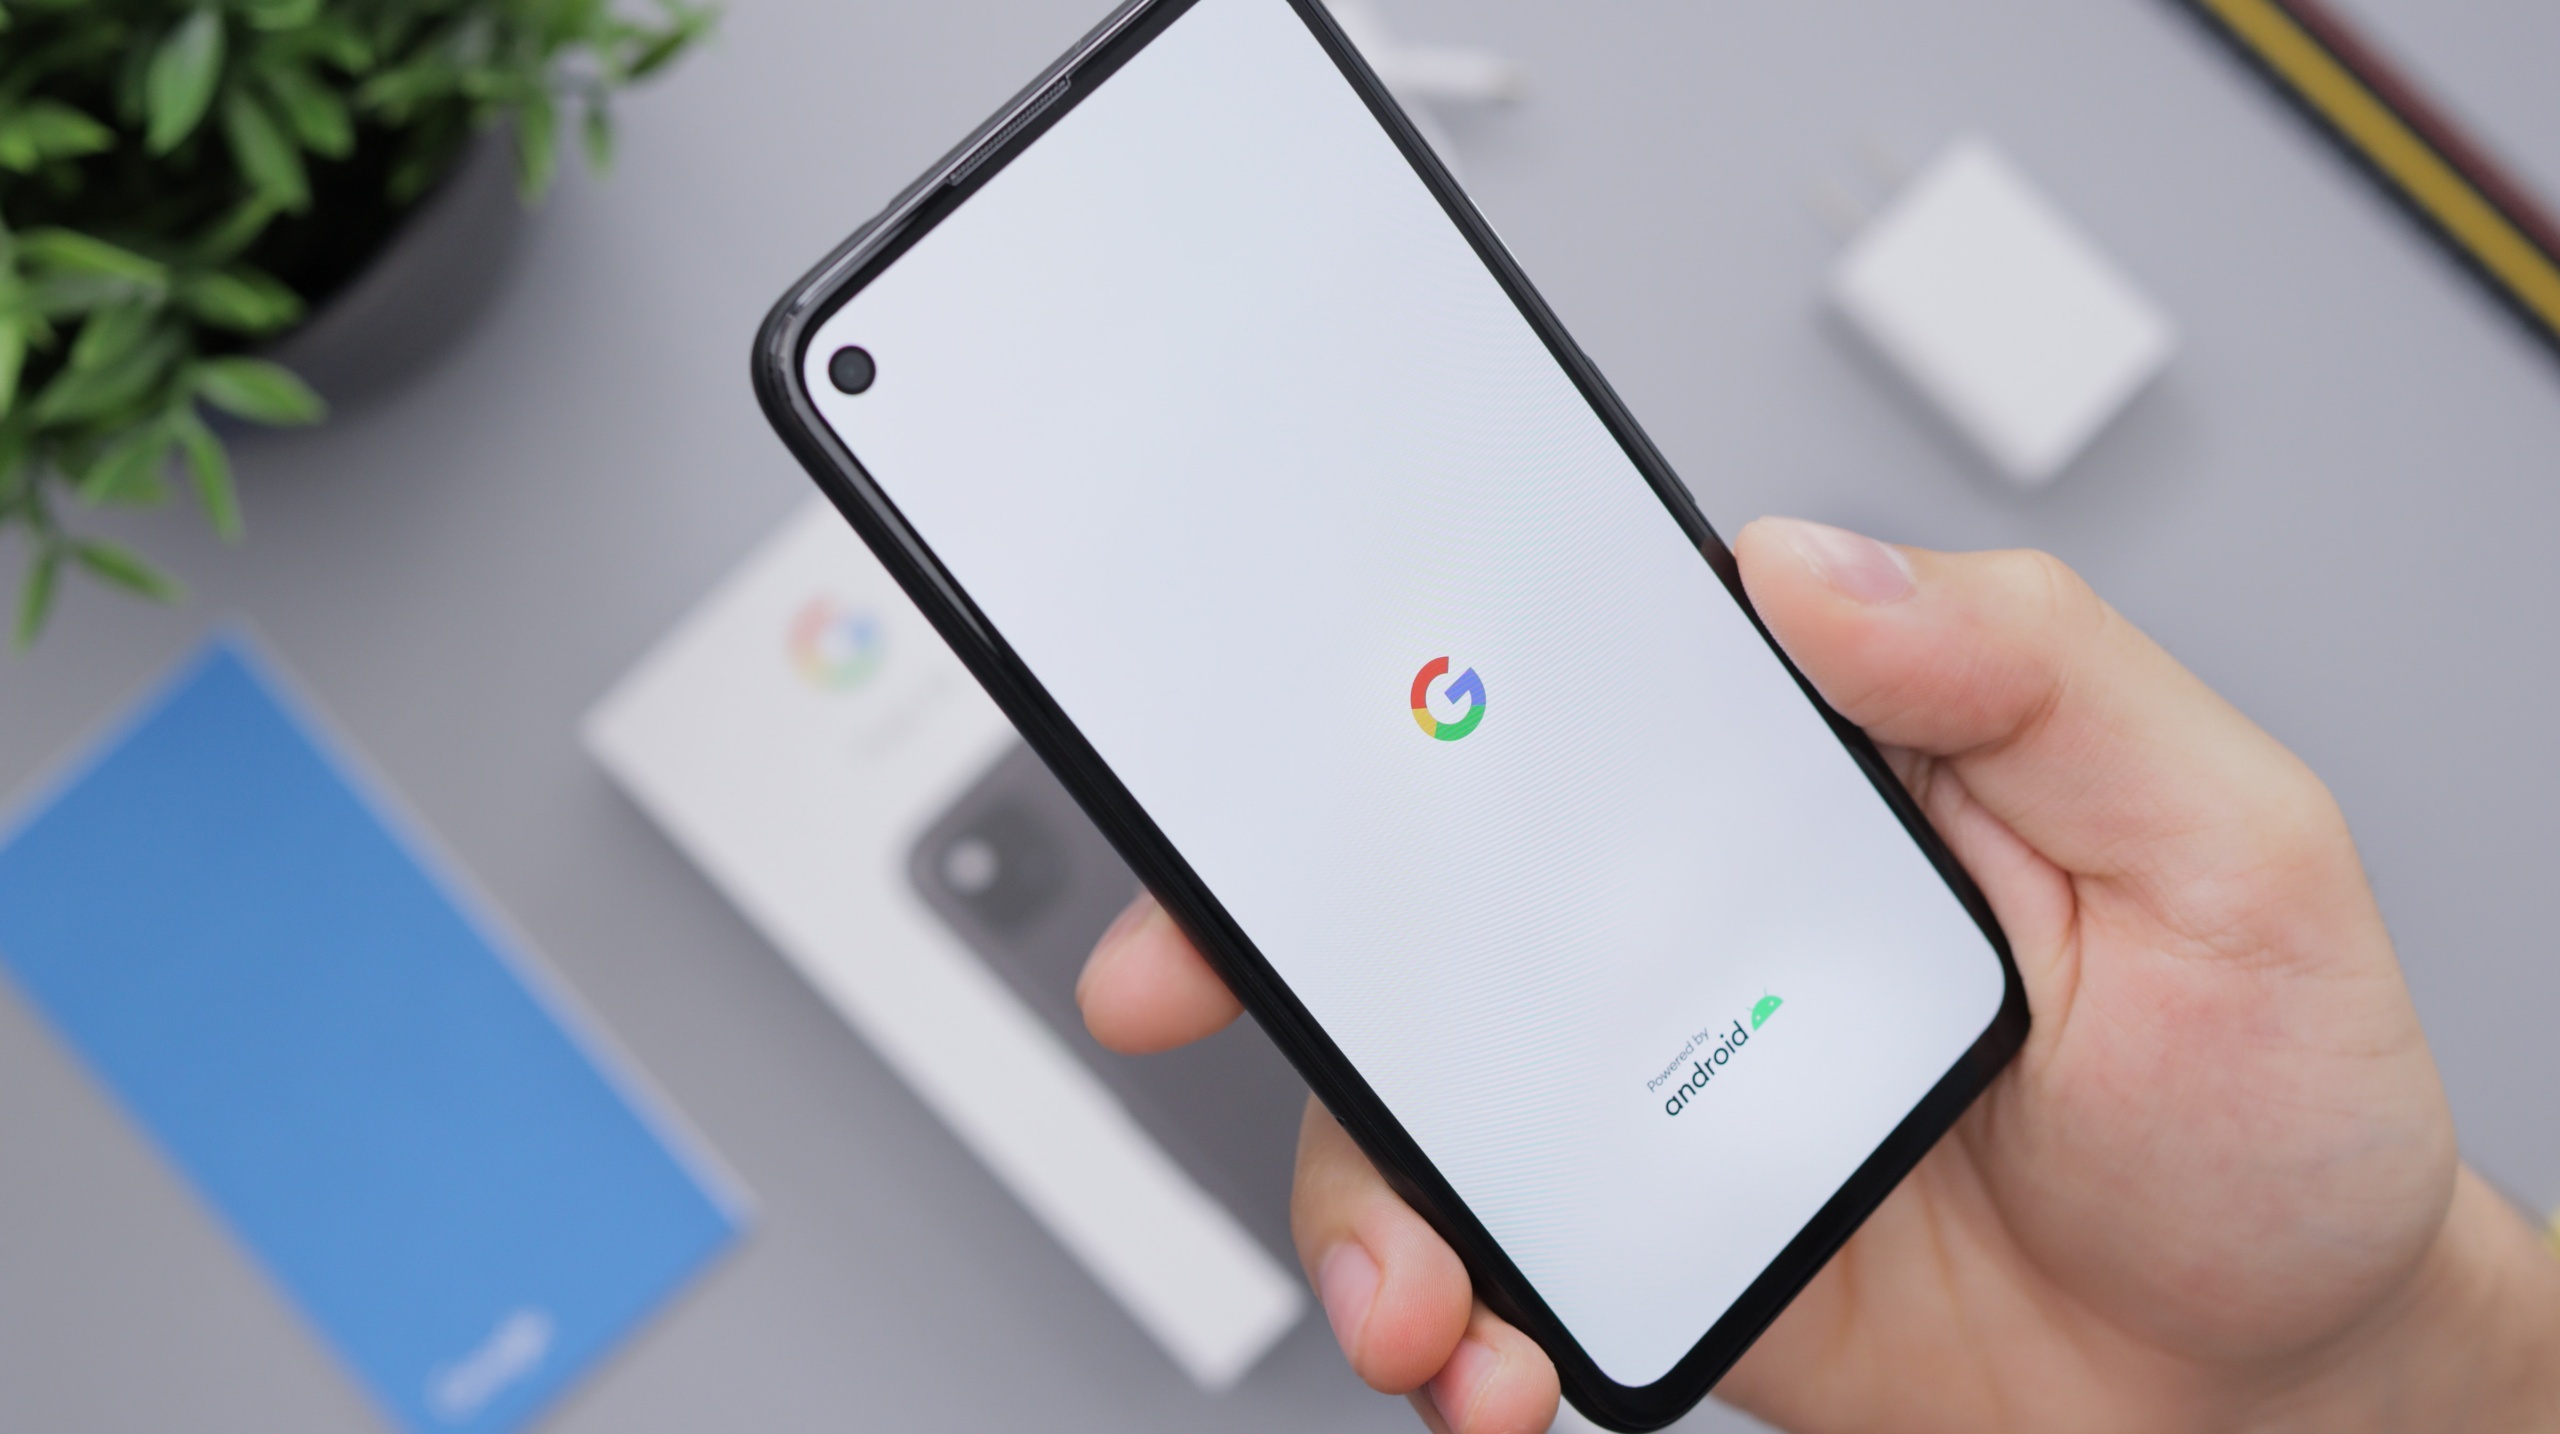 Google tries to publicly shame Apple for ignoring the RCS protocol to unify communication between iPhone and Android users